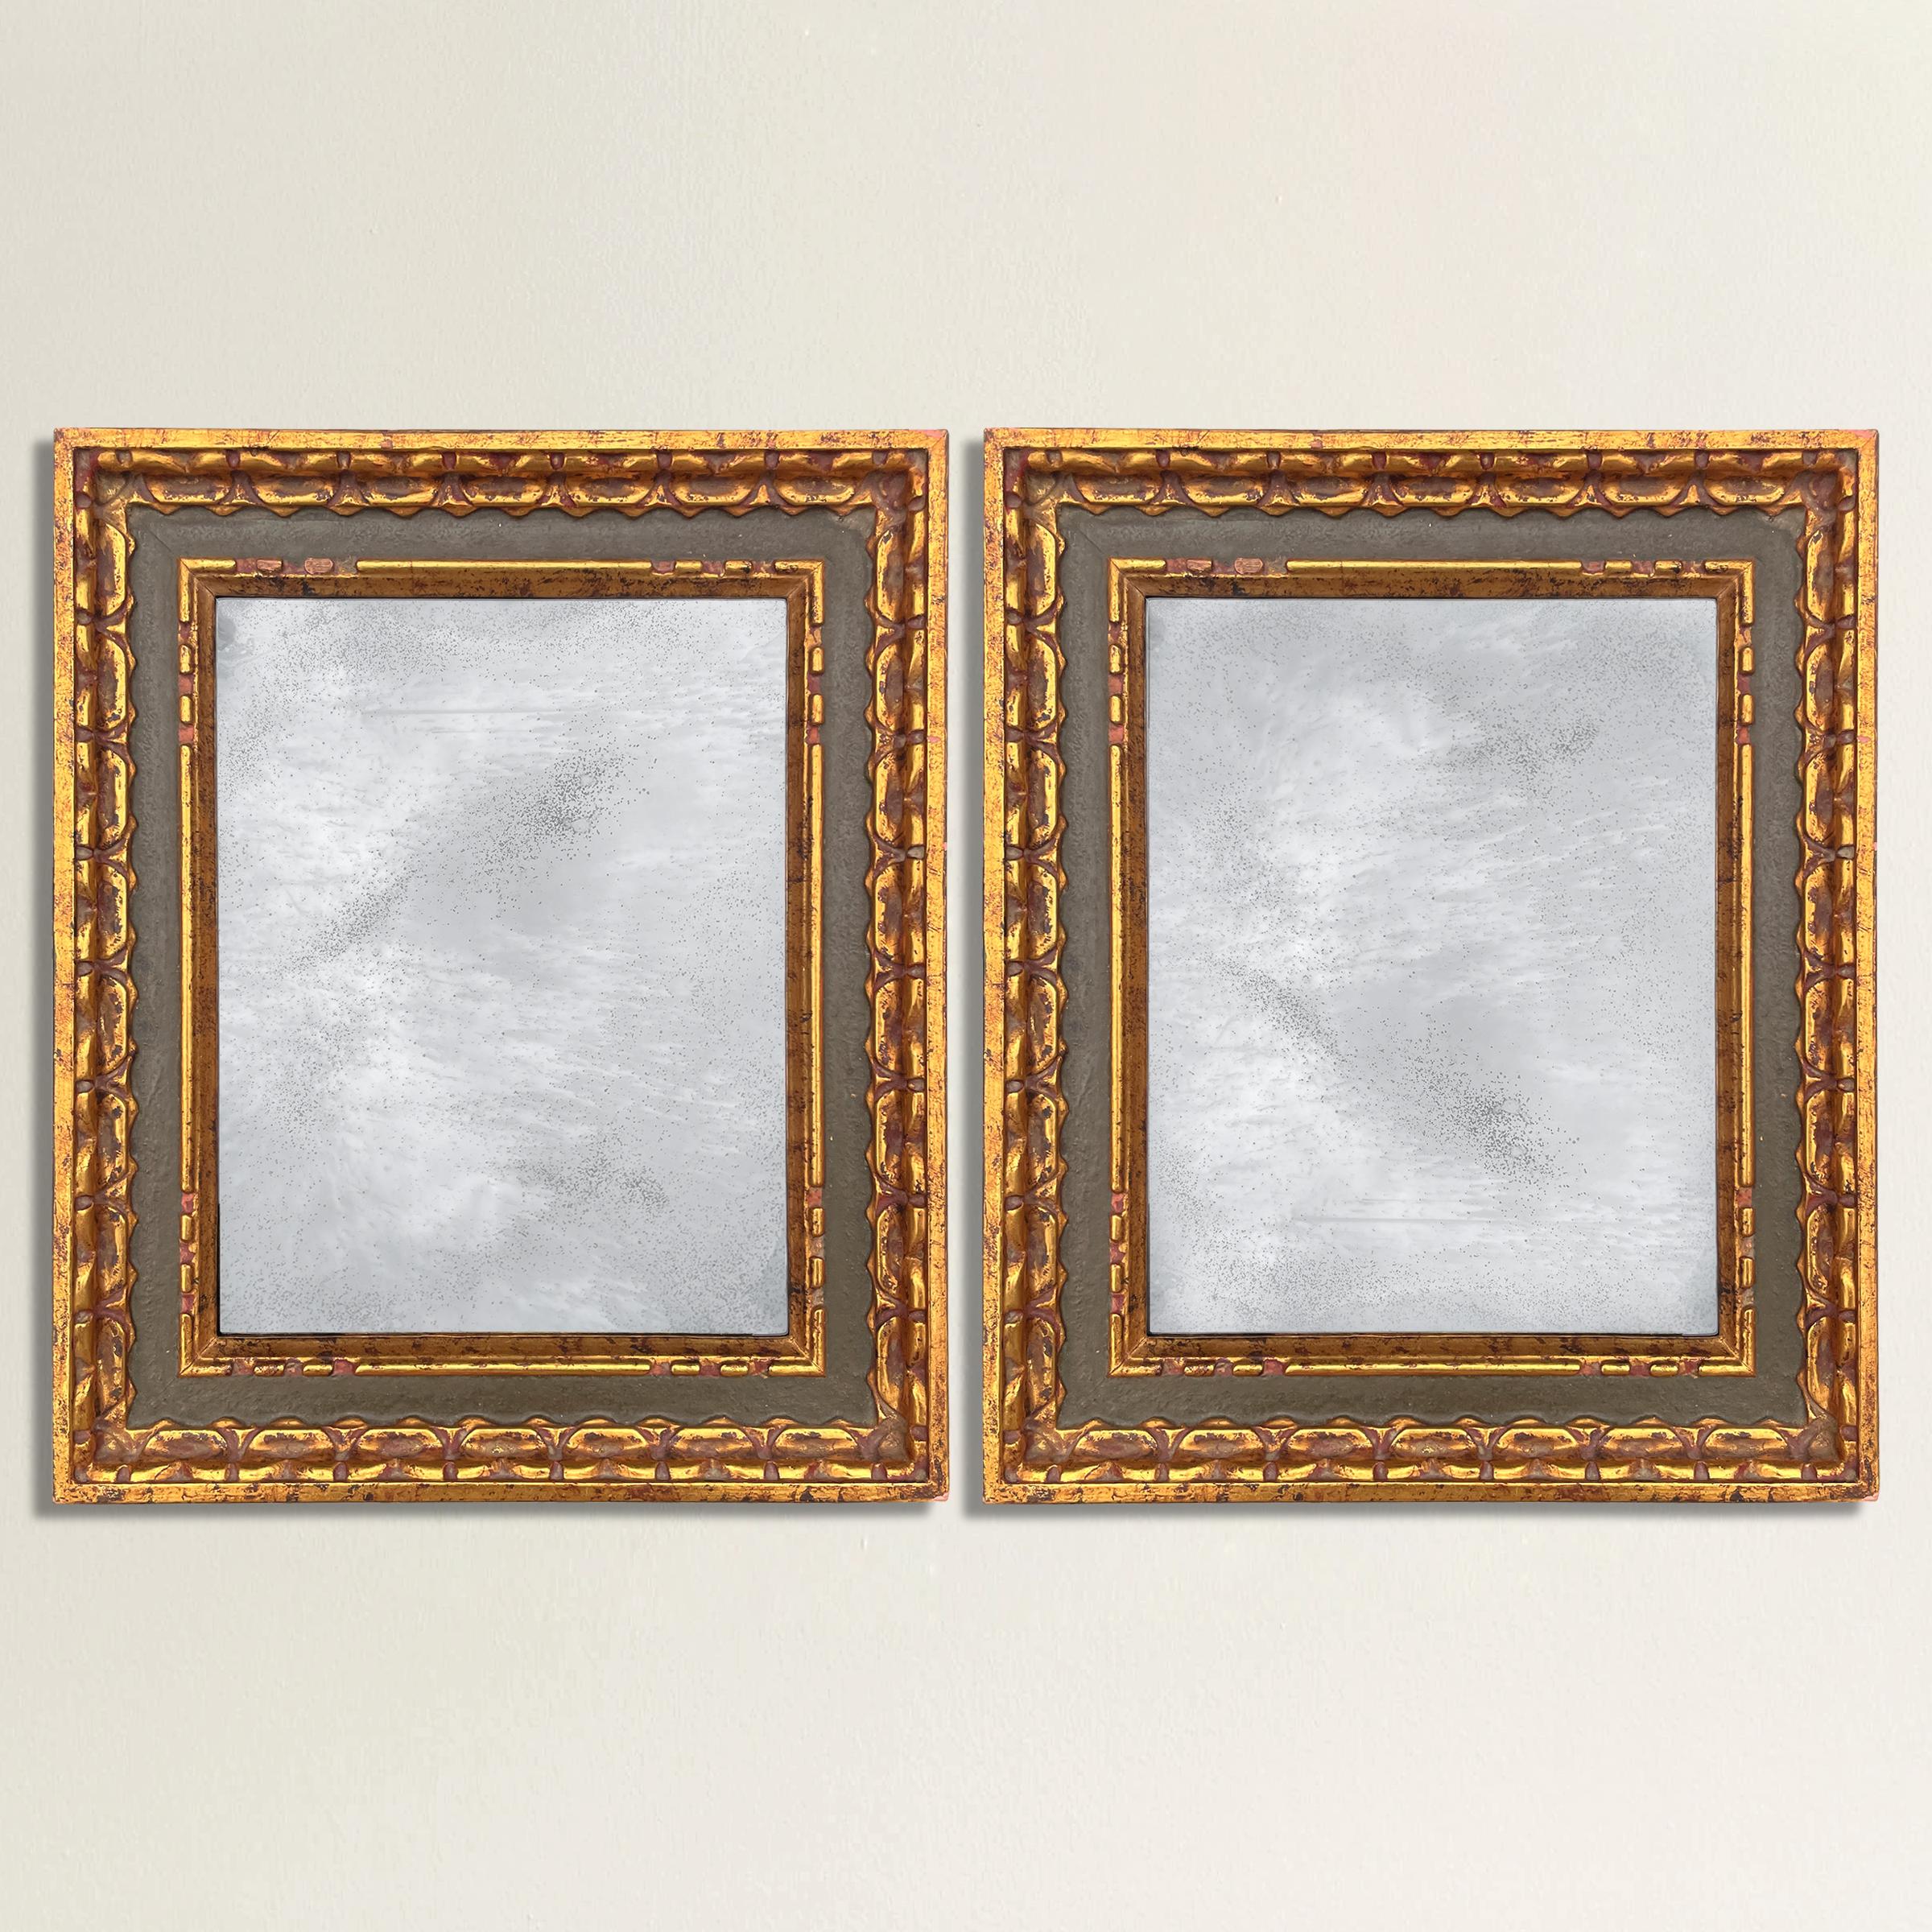 An incredible pair of 19th century Italian carved wood frames with water-gilt highlights, museum olive paint, and the most beautiful wavy silvered and antiqued restoration glass mirrors ever! The perfect pair of mirror to hang over a console table,